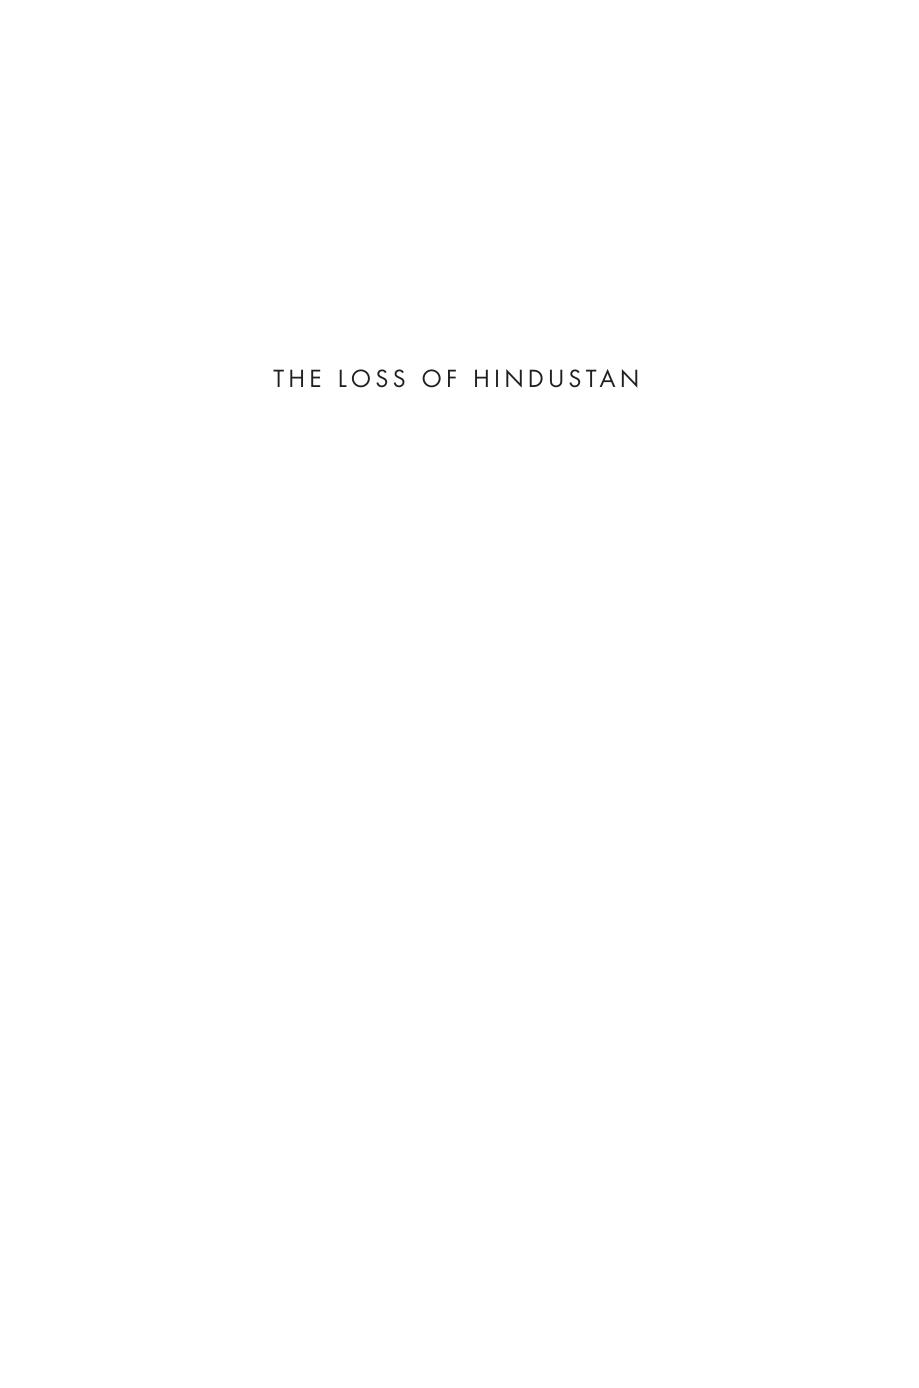 The Loss of Hindustan by Manan Ahmed Asif